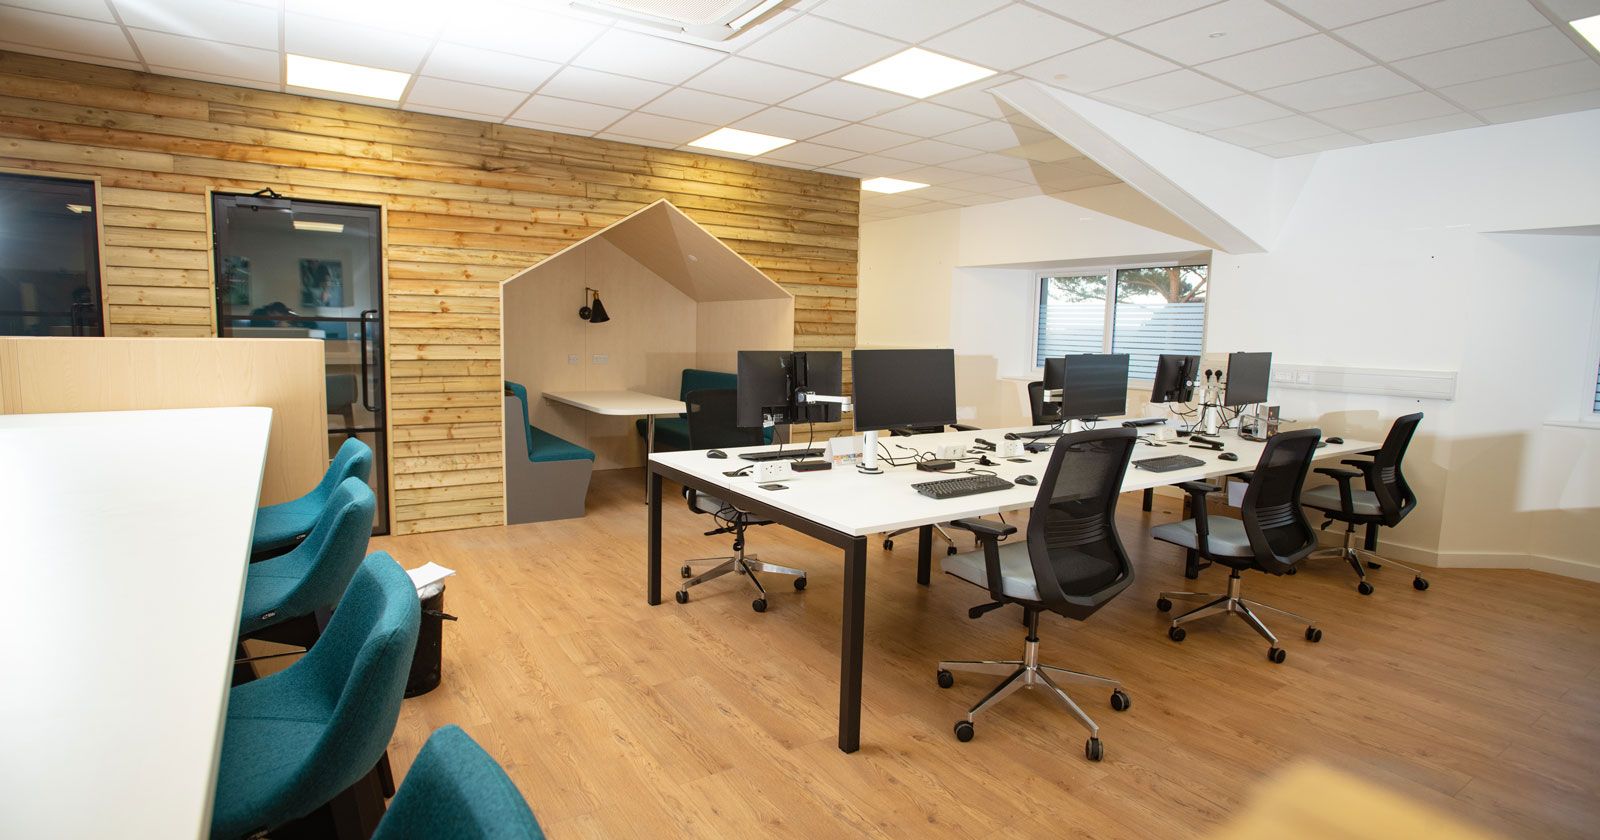 Wattbike Office Design with Bespoke Personal Meeting Rooms Designed and Installed by APSS Joinery